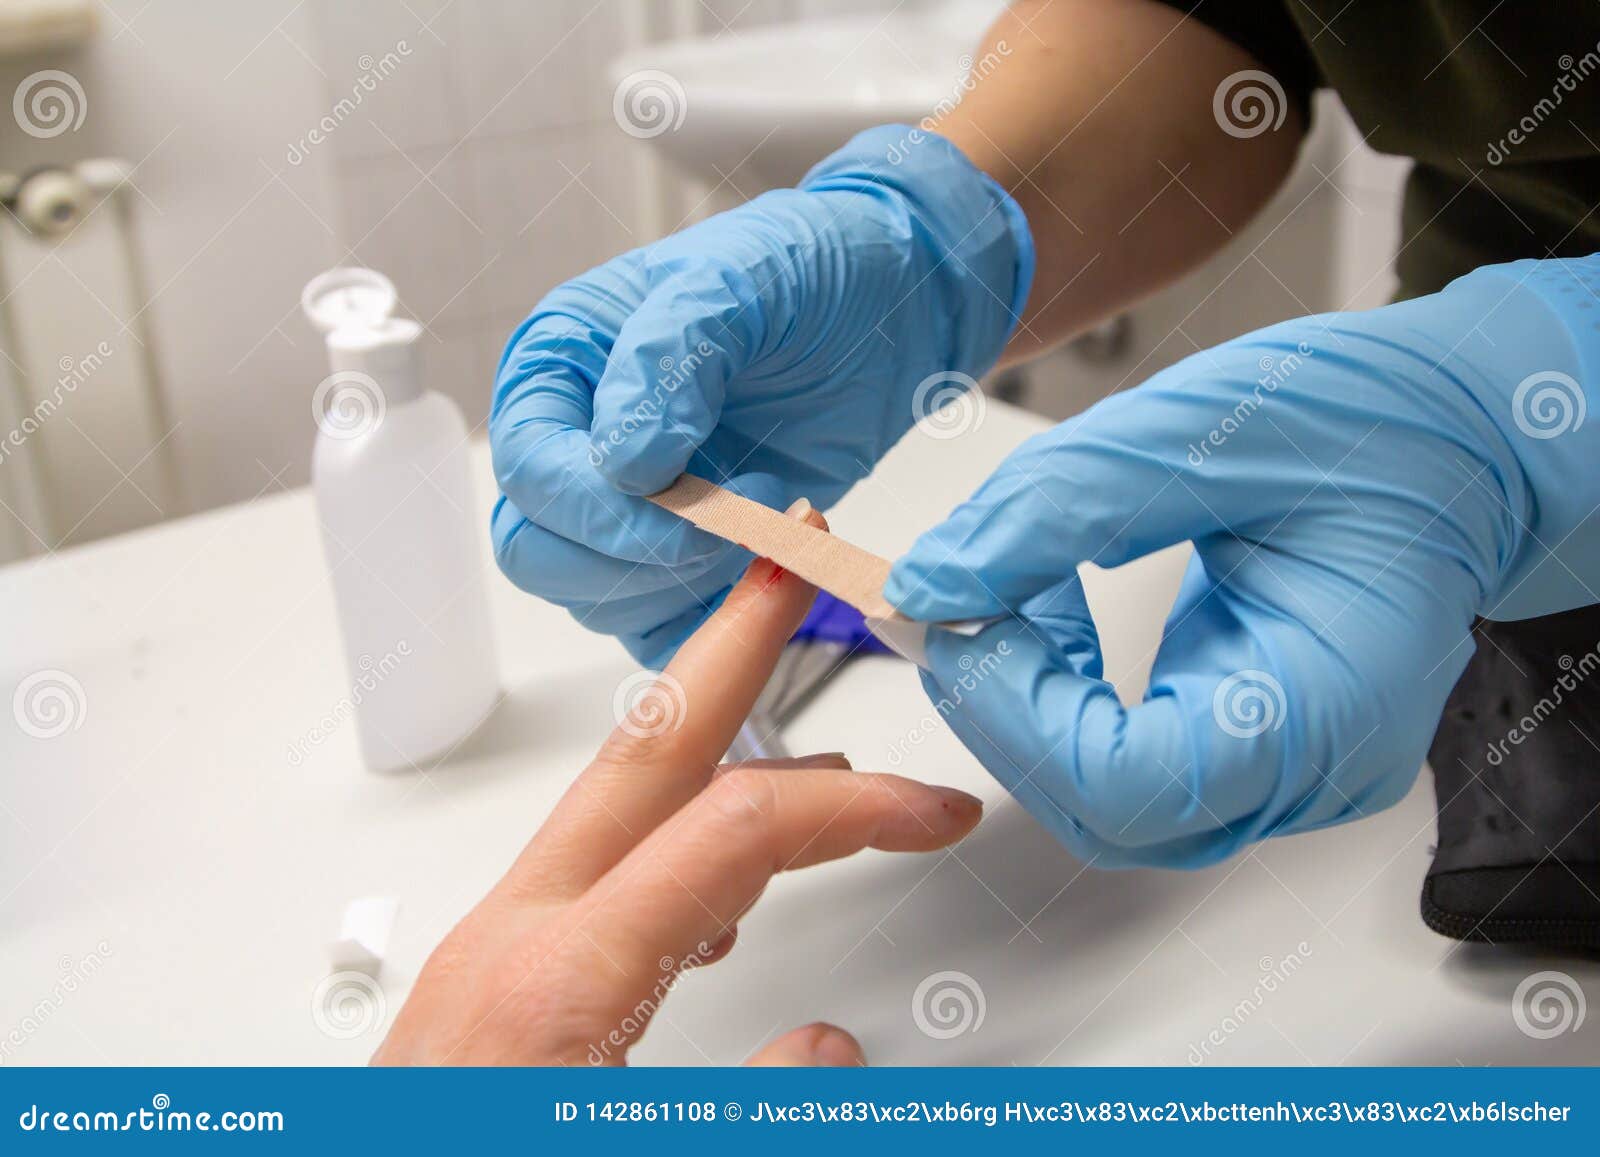 A Doctor Sticks a Plaster on a Finger Stock Photo - Image of emergency